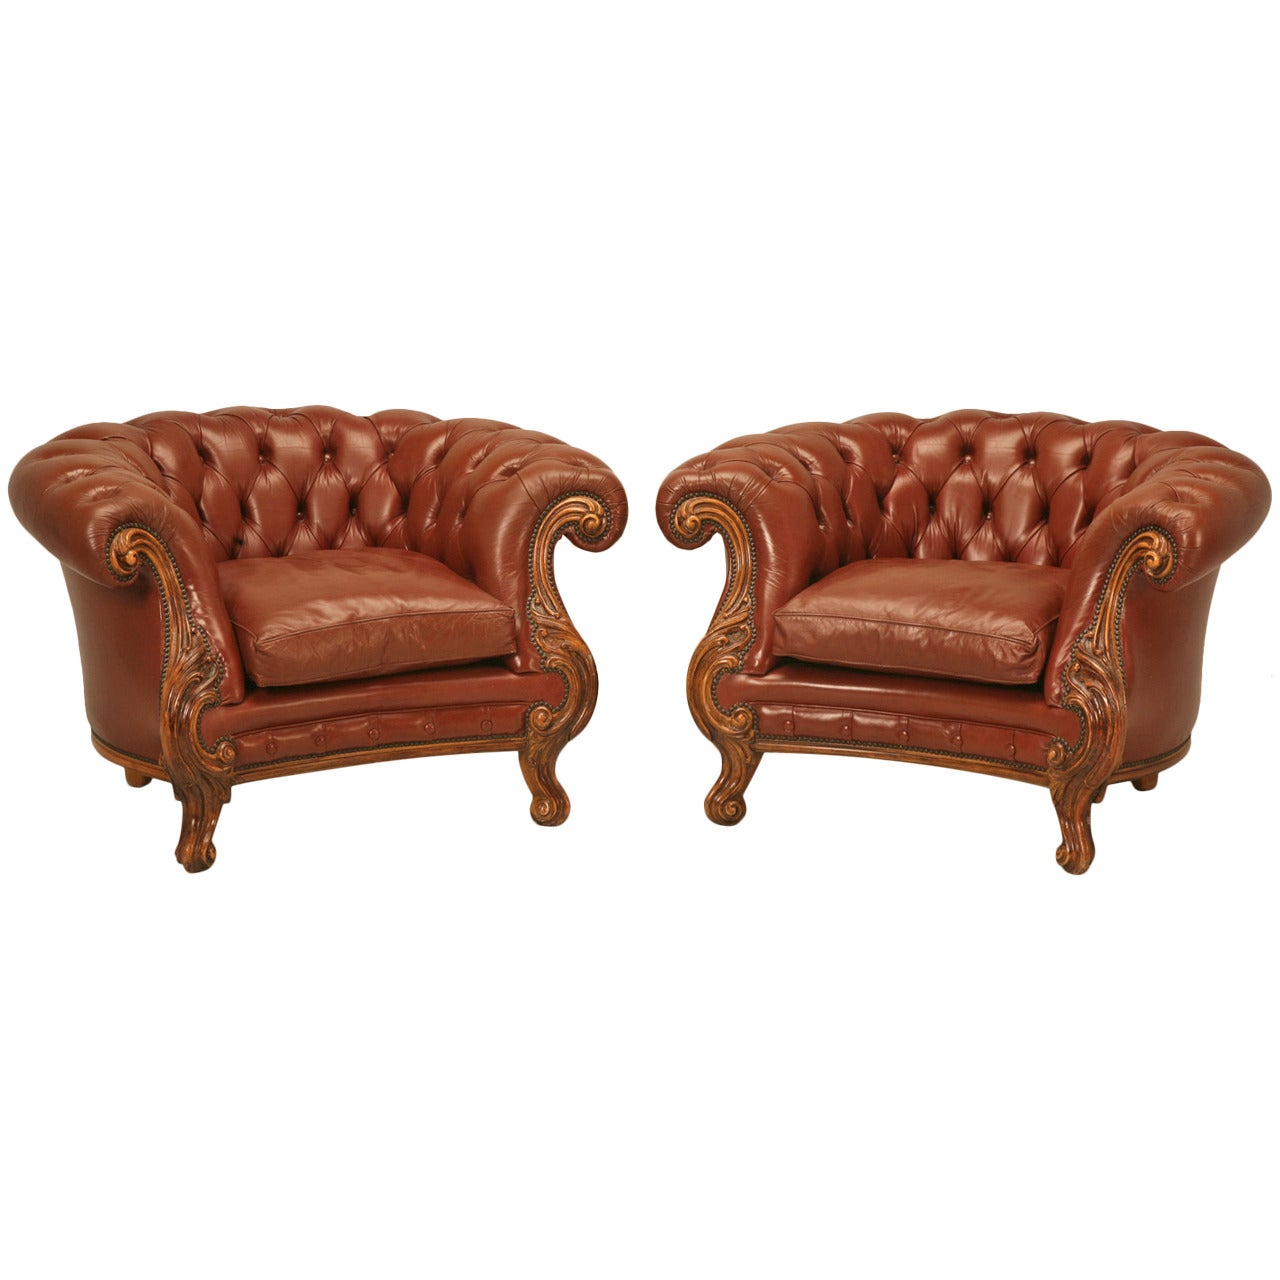 French Leather Chesterfields Armchairs with a Bit of a Twist